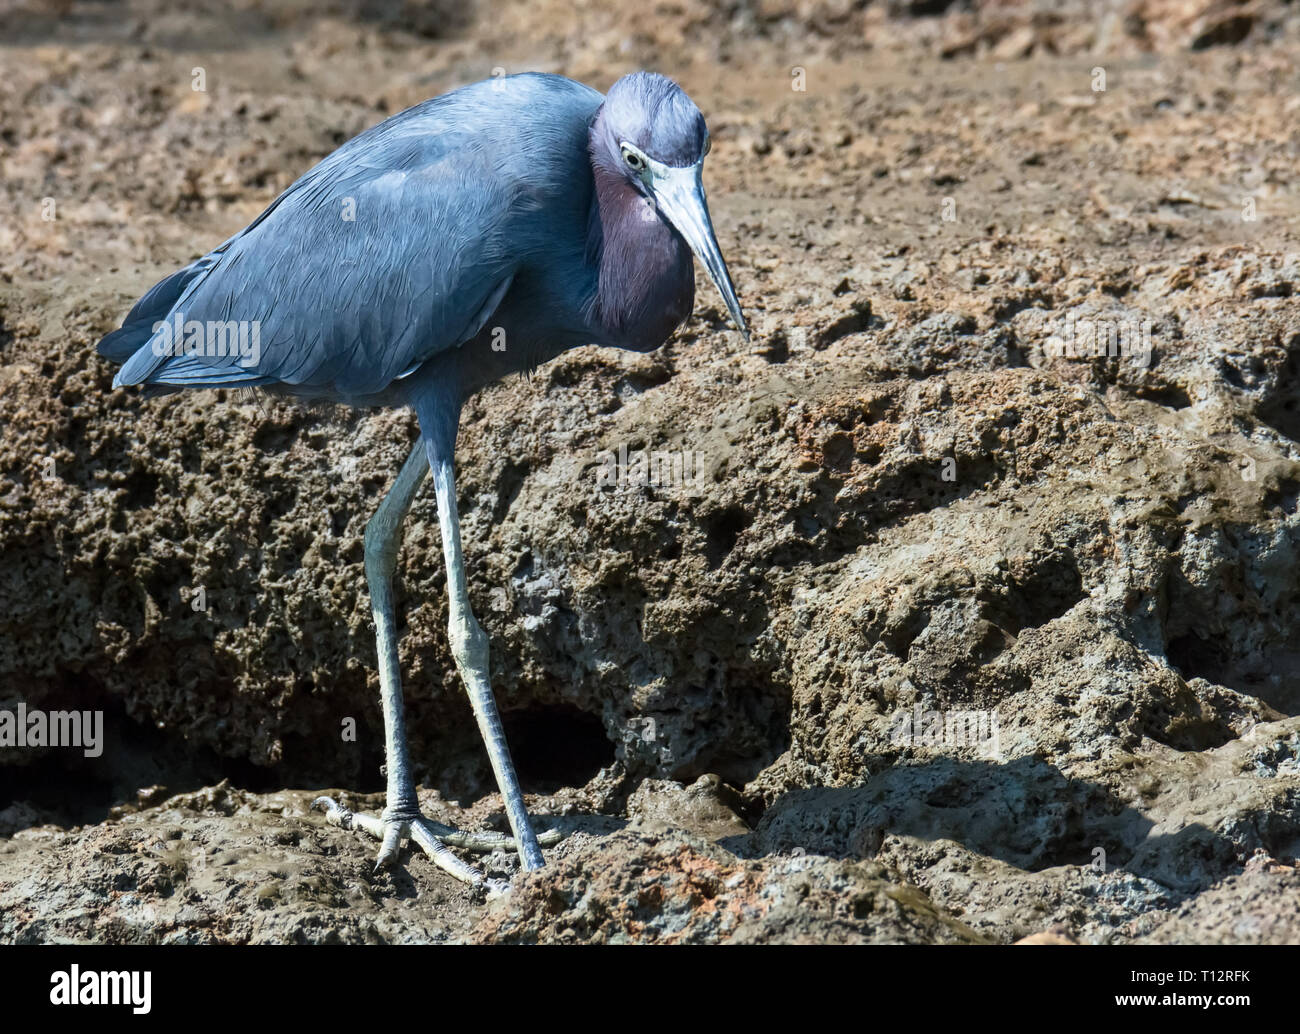 Stolling in the mud of a river bank a little blue heron scans for a likely meal Stock Photo